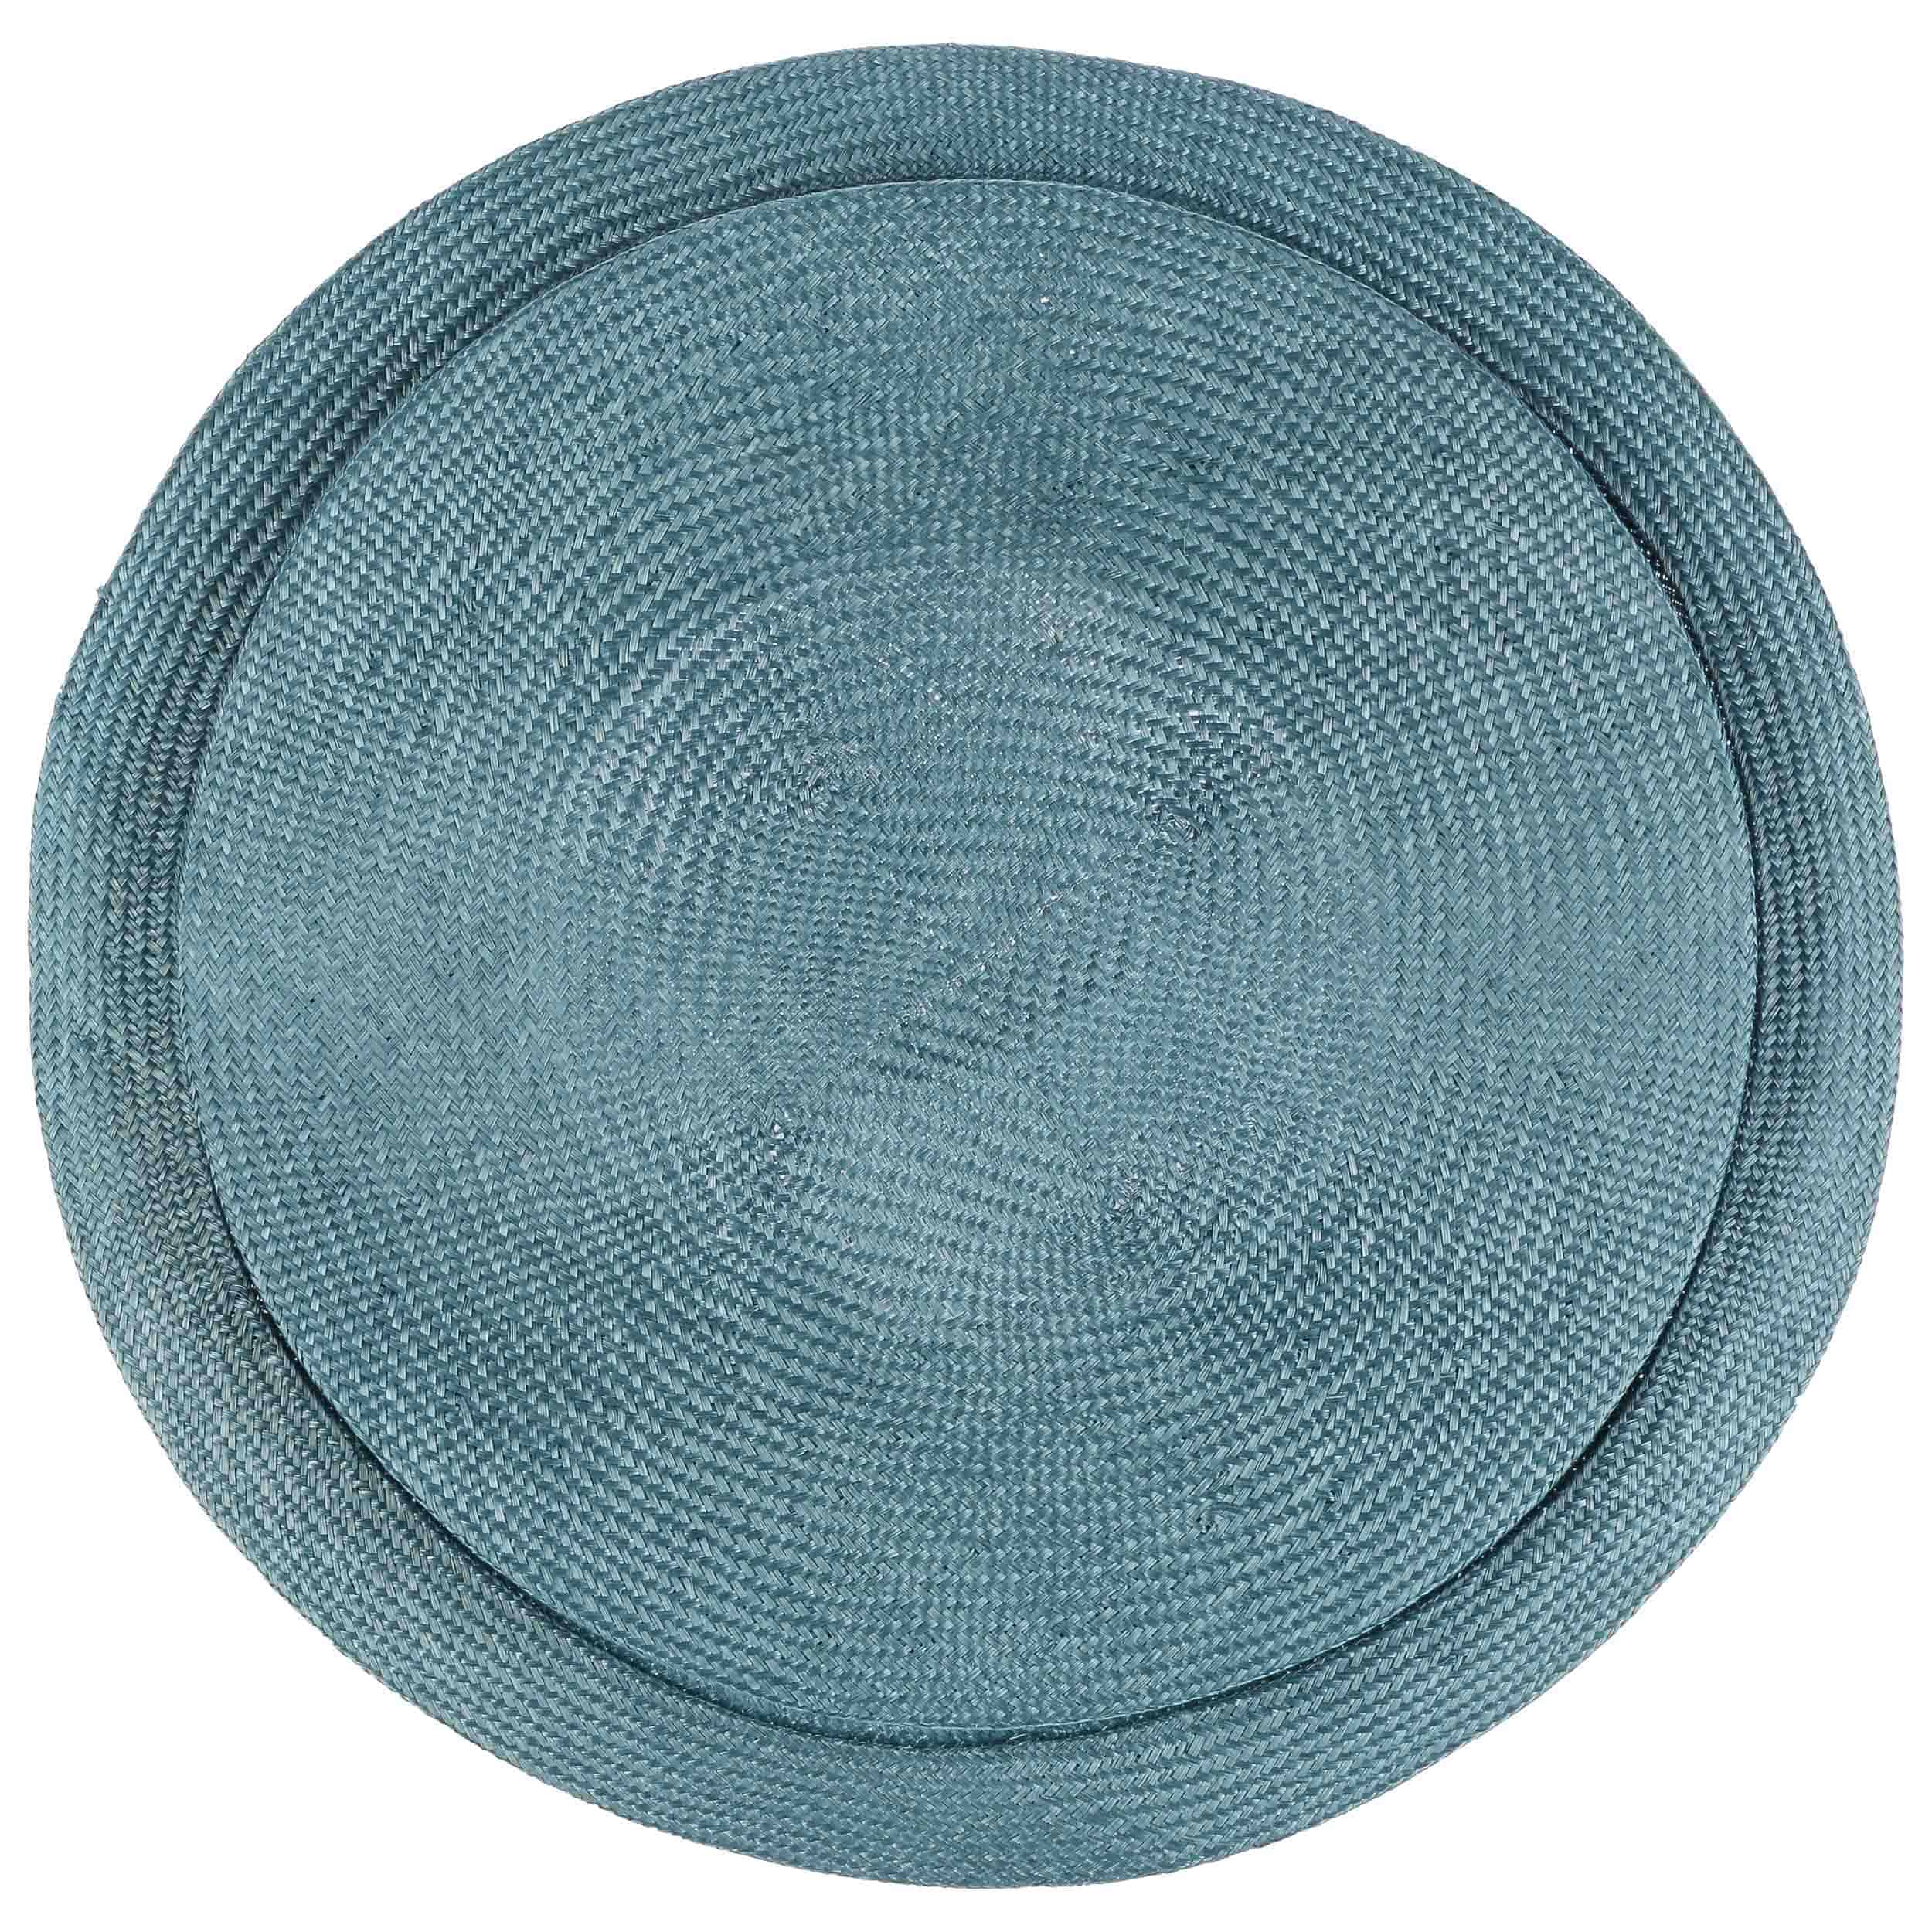 Sisal Collapsible Hat Seeberger women´s hat summer hat